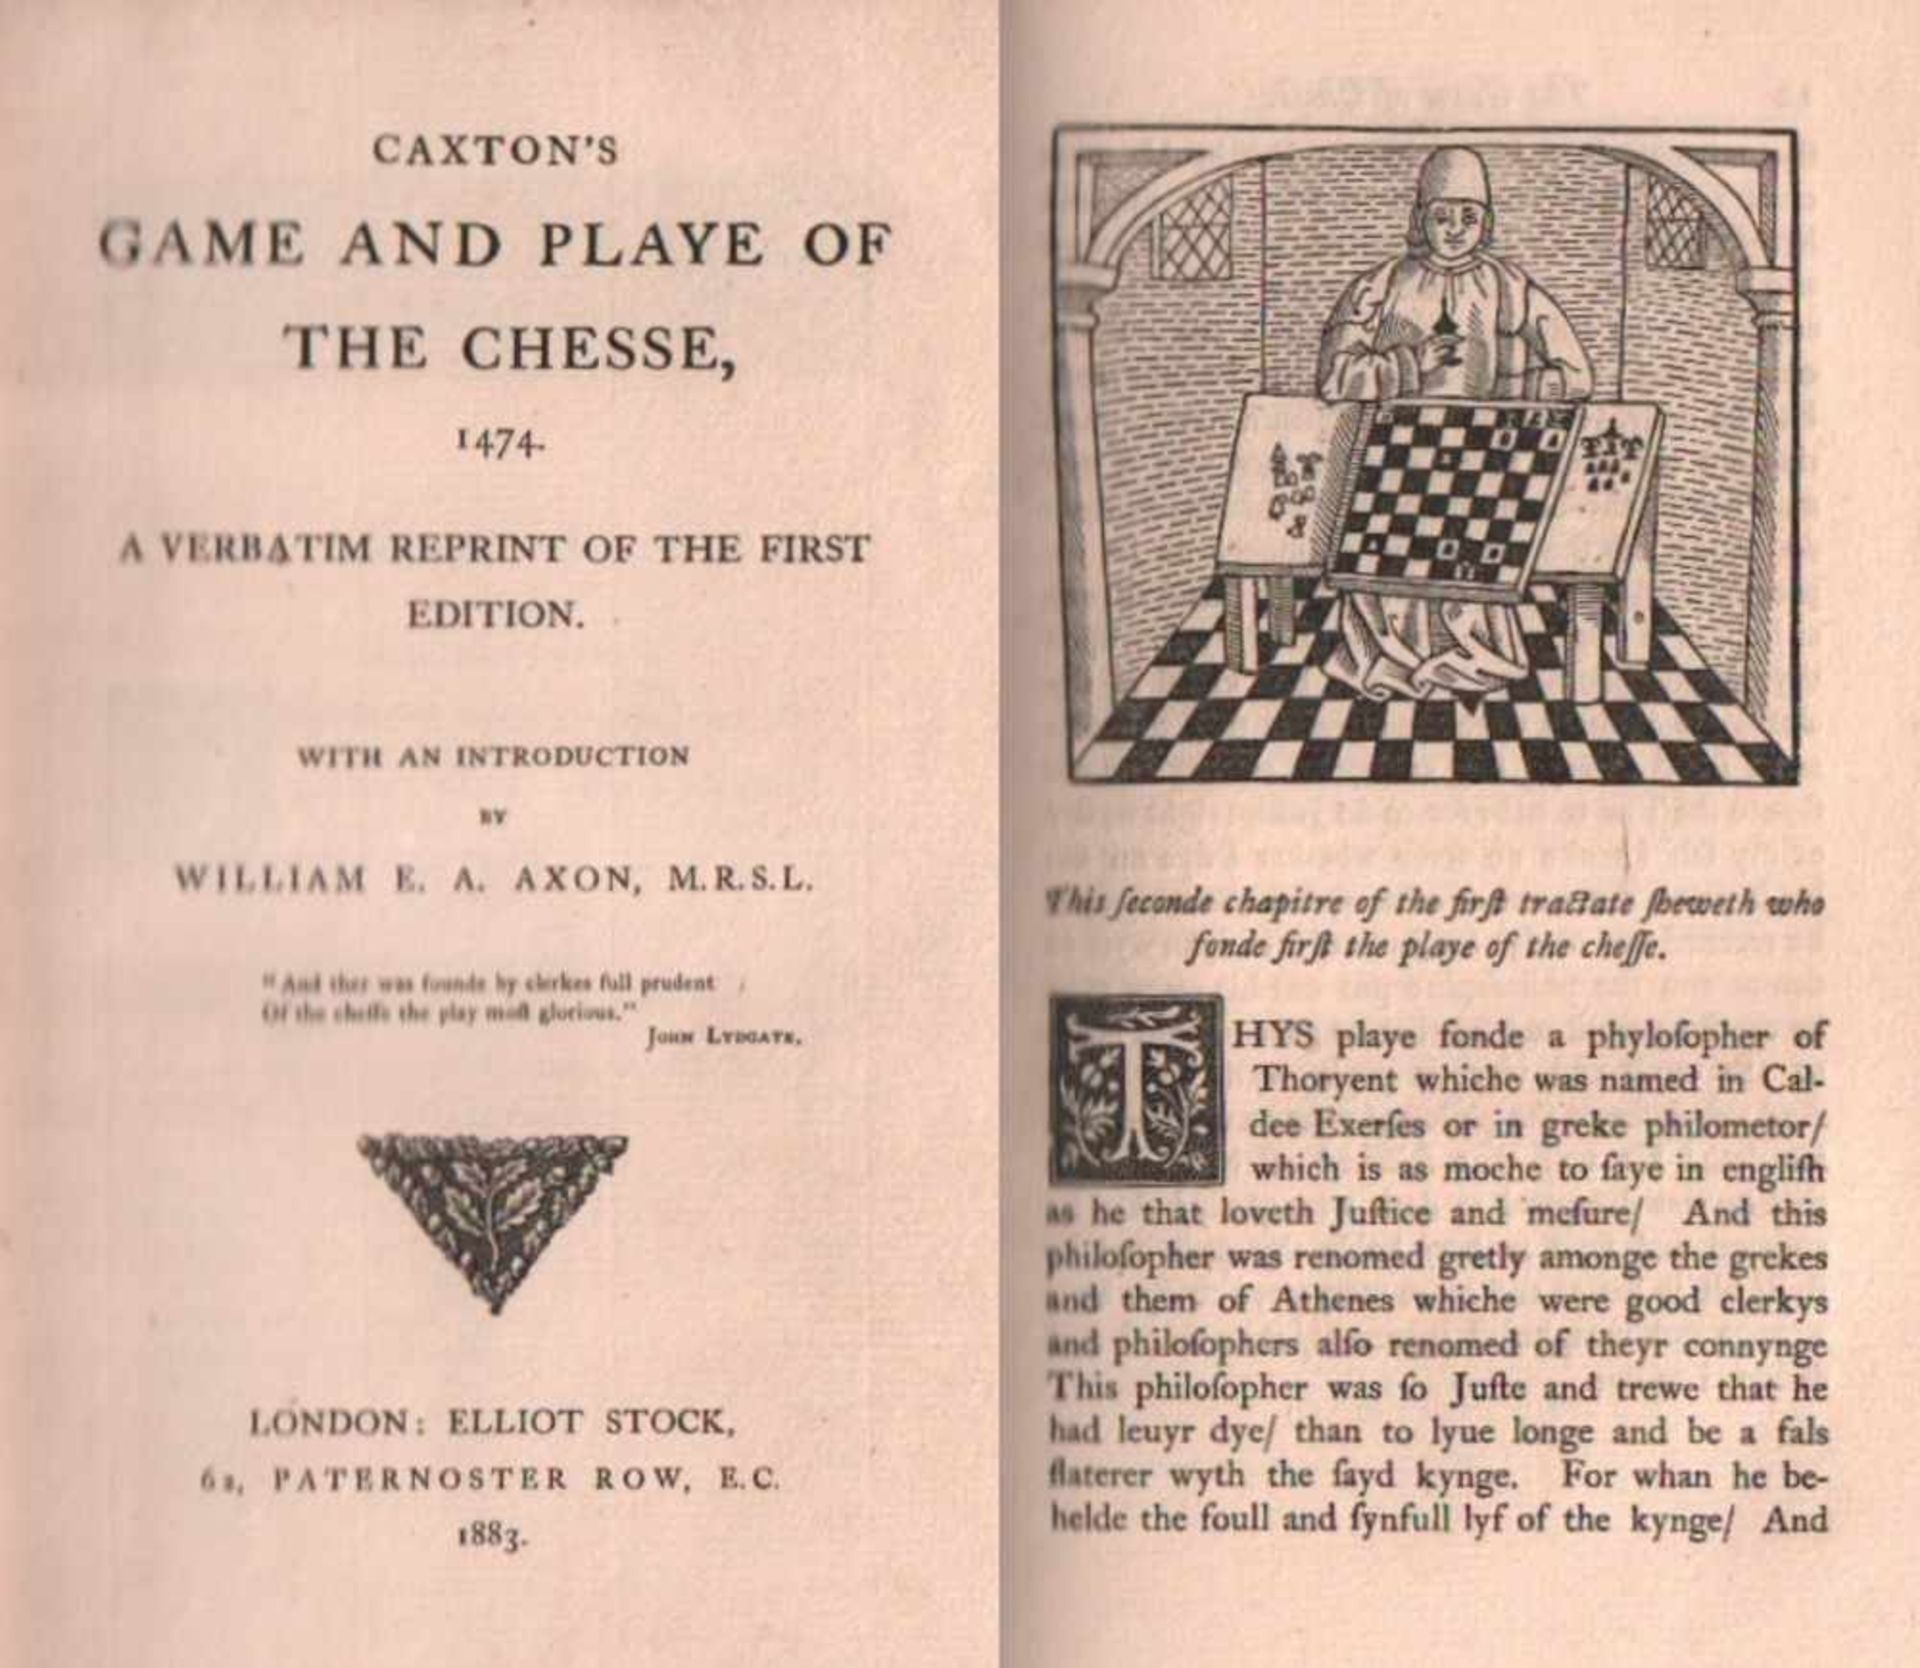 (Cessolis, Jacobus de) Caxton'sGame and Playe of the Chesse, 1474. A verbatim reprint of the first